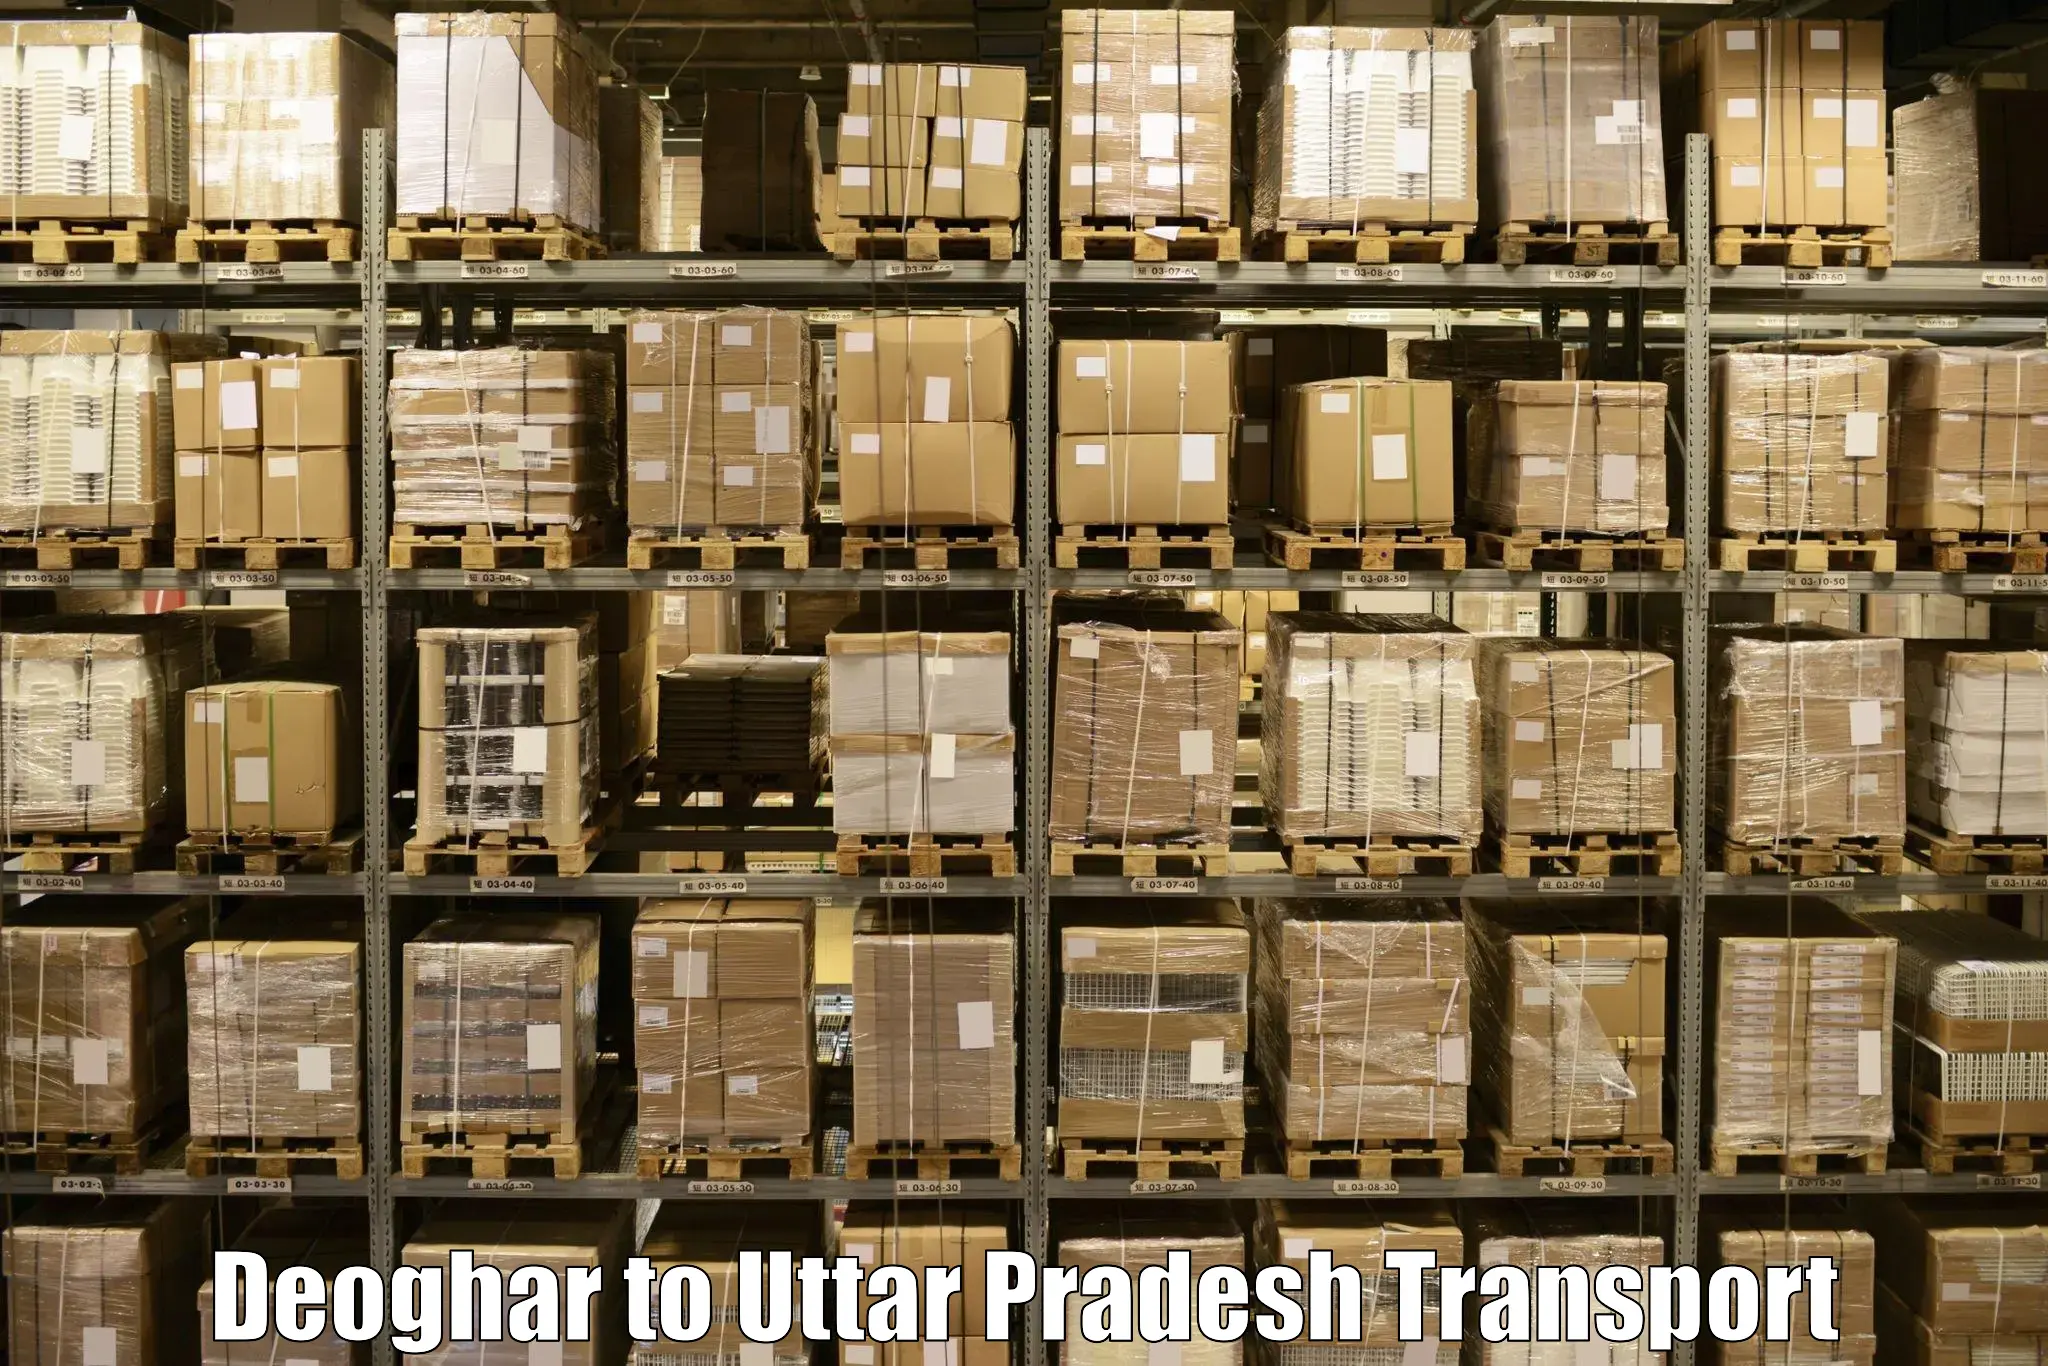 Air freight transport services Deoghar to Aligarh Muslim University